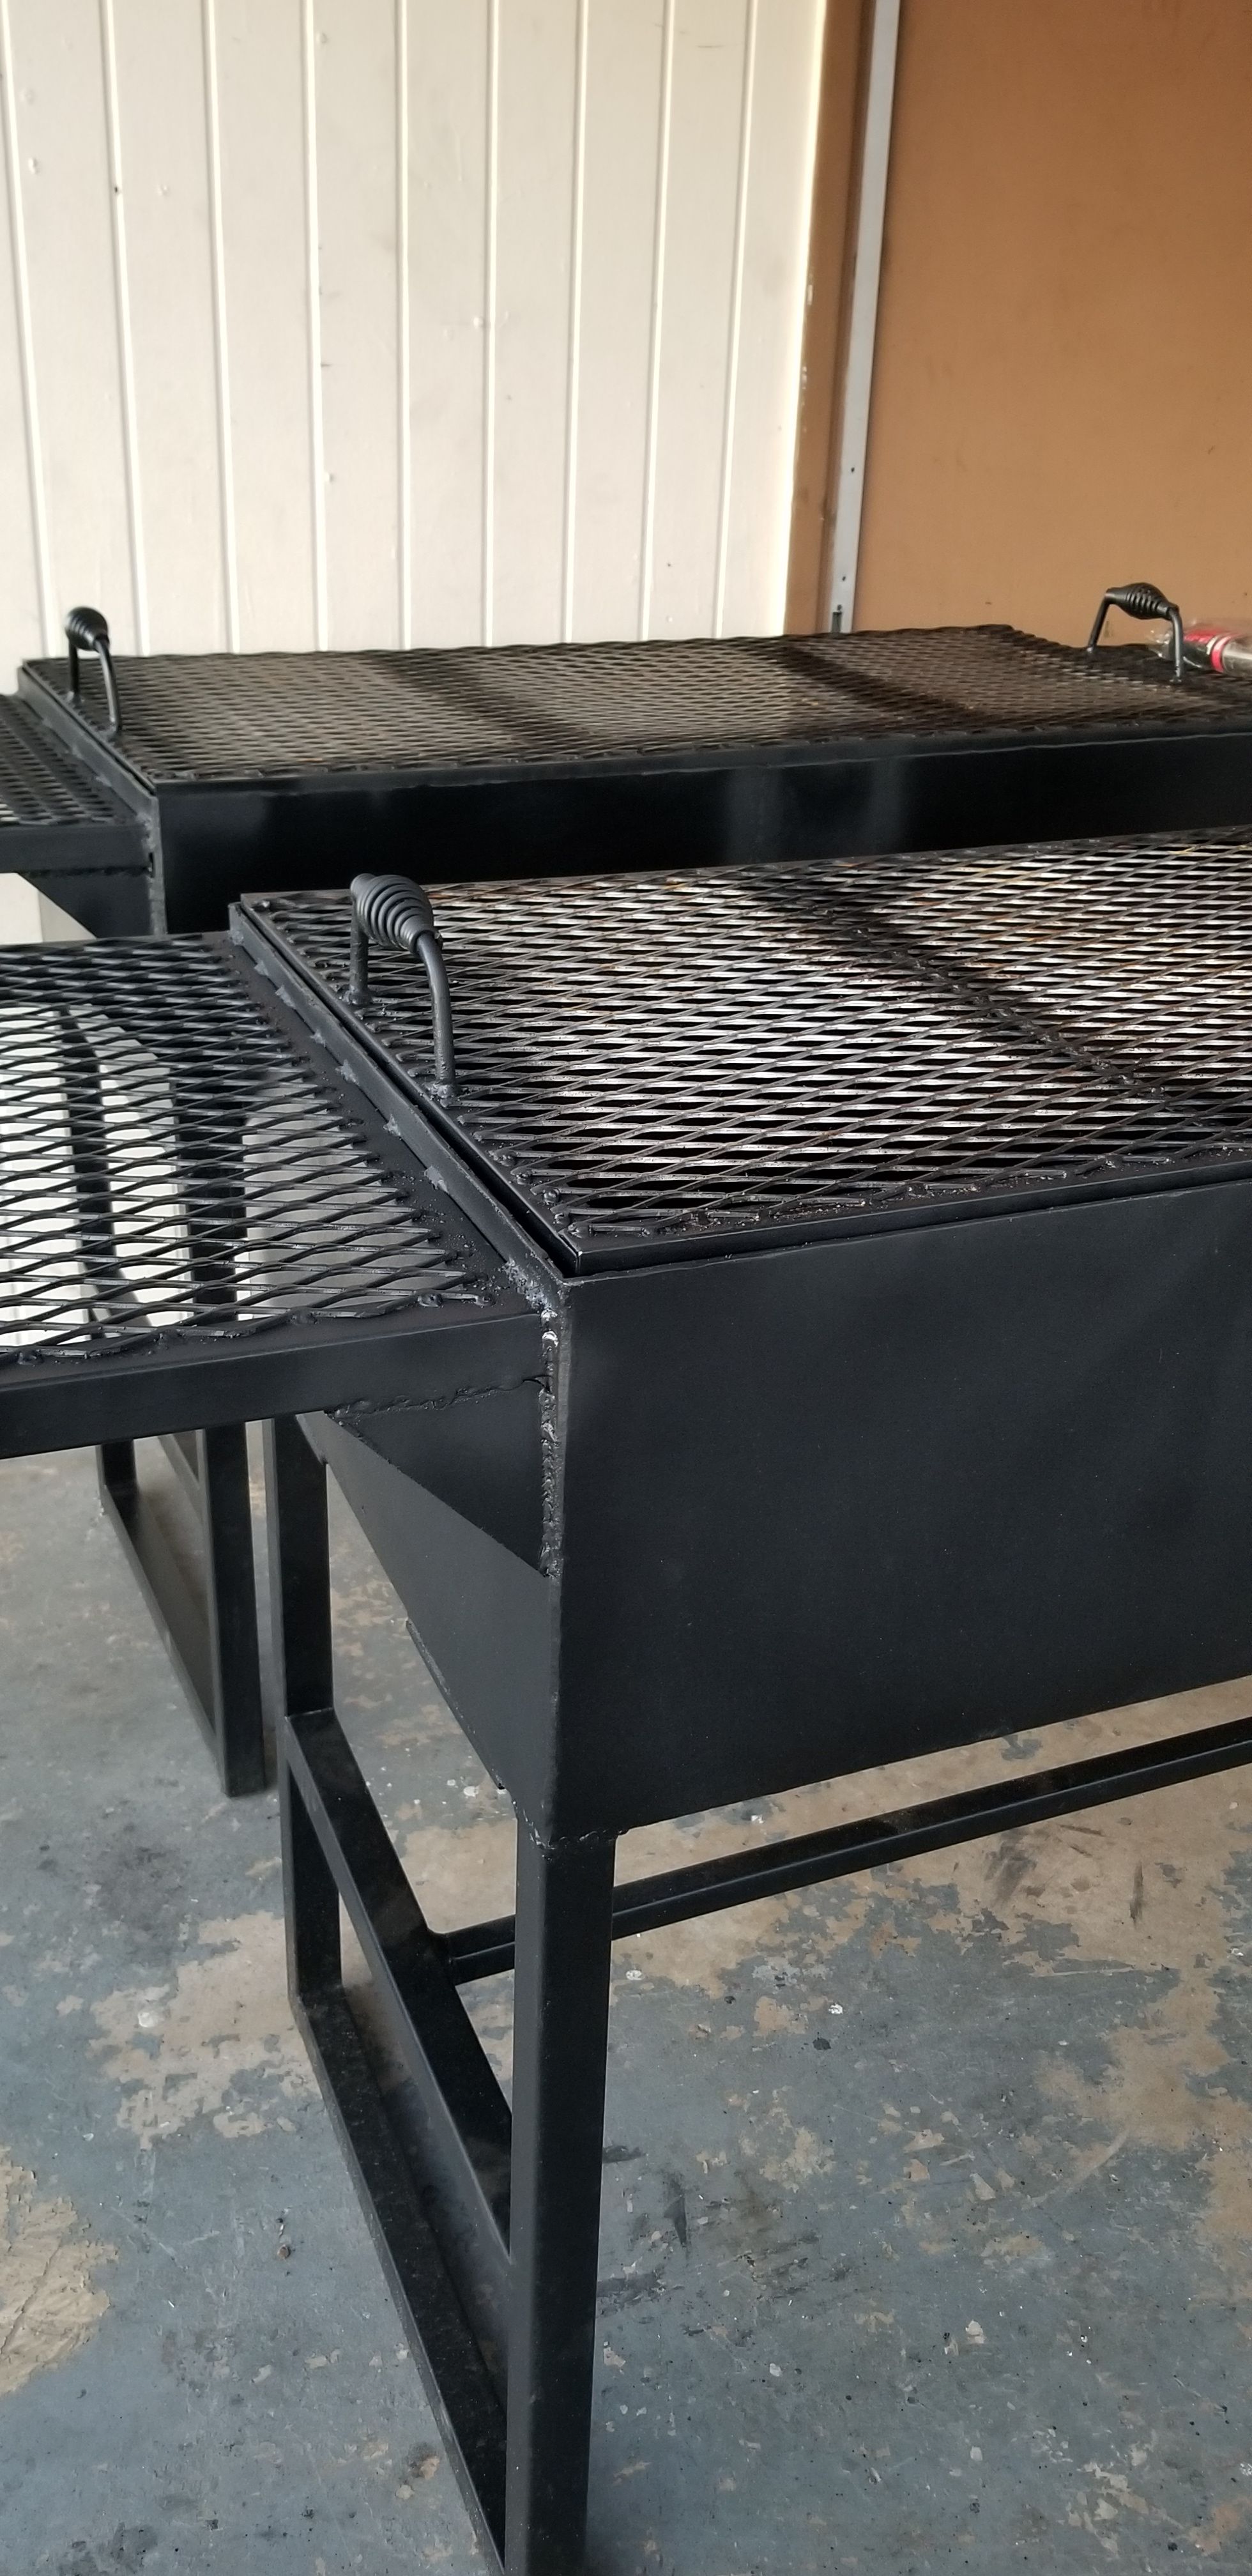 Ninja Woodfire Outdoor Grill for Sale in Kissimmee, FL - OfferUp